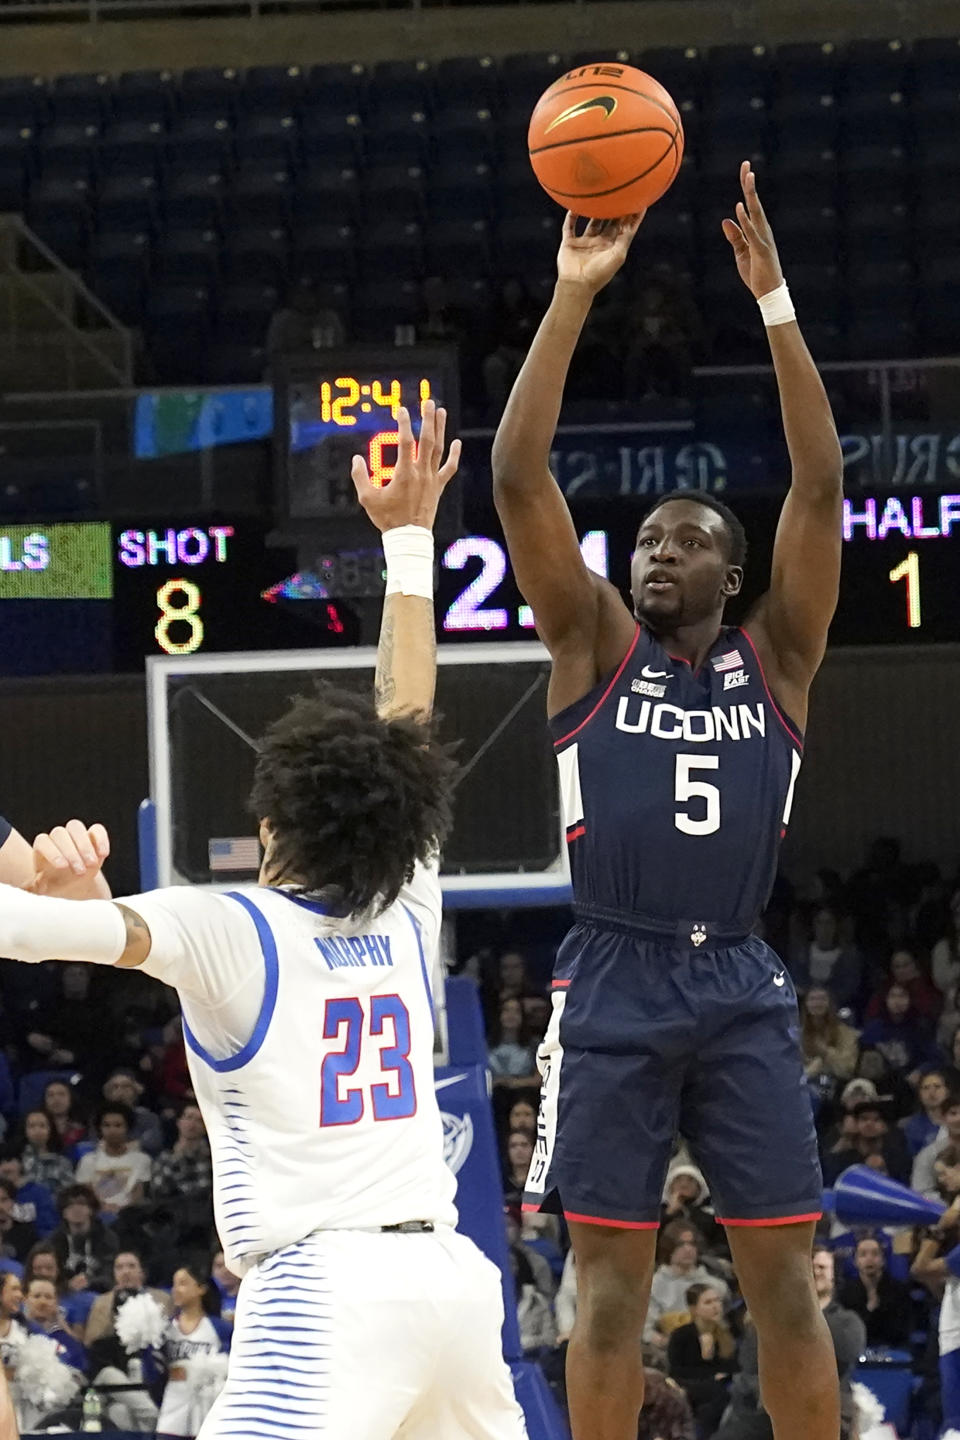 Connecticut's Hassan Diarra (5) shoots over DePaul's Caleb Murphy during the first half of an NCAA college basketball game Tuesday, Jan. 31, 2023, in Chicago. (AP Photo/Charles Rex Arbogast)